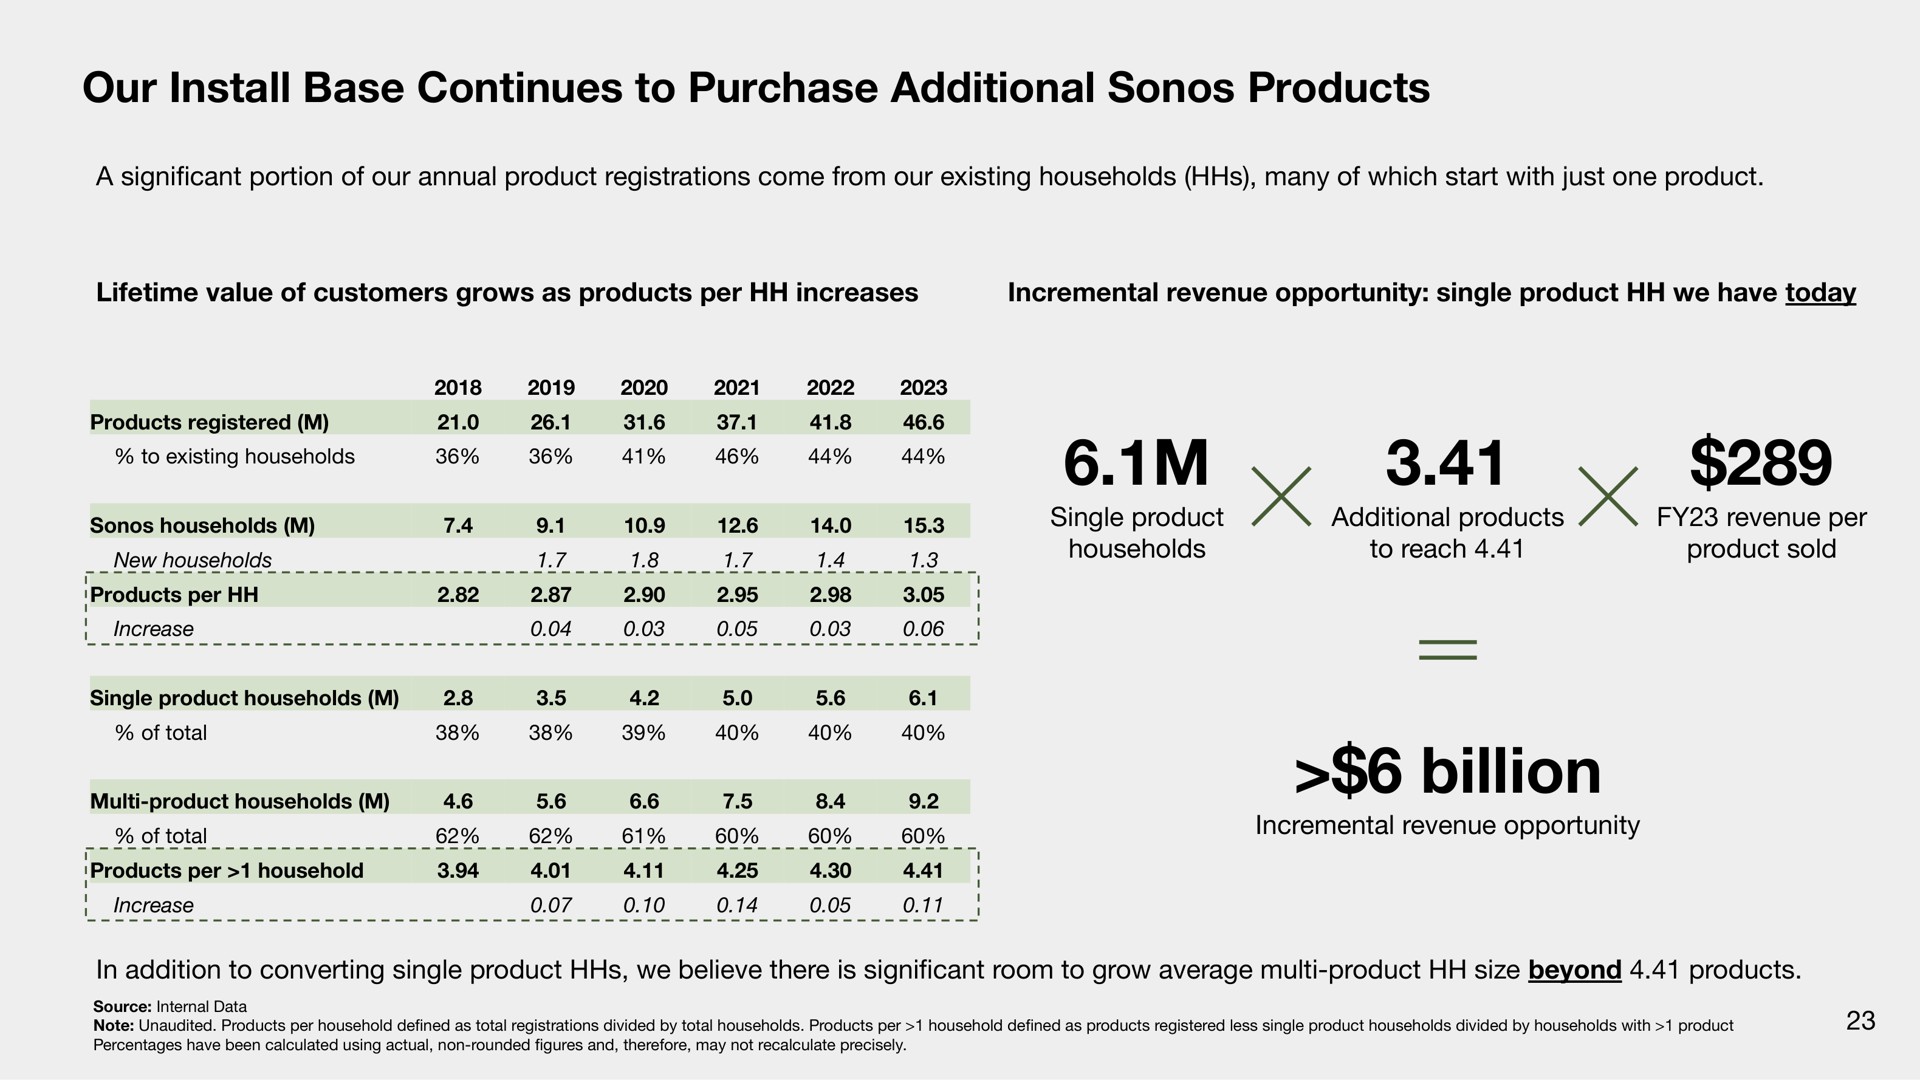 our install base continues to purchase additional products billion | Sonos